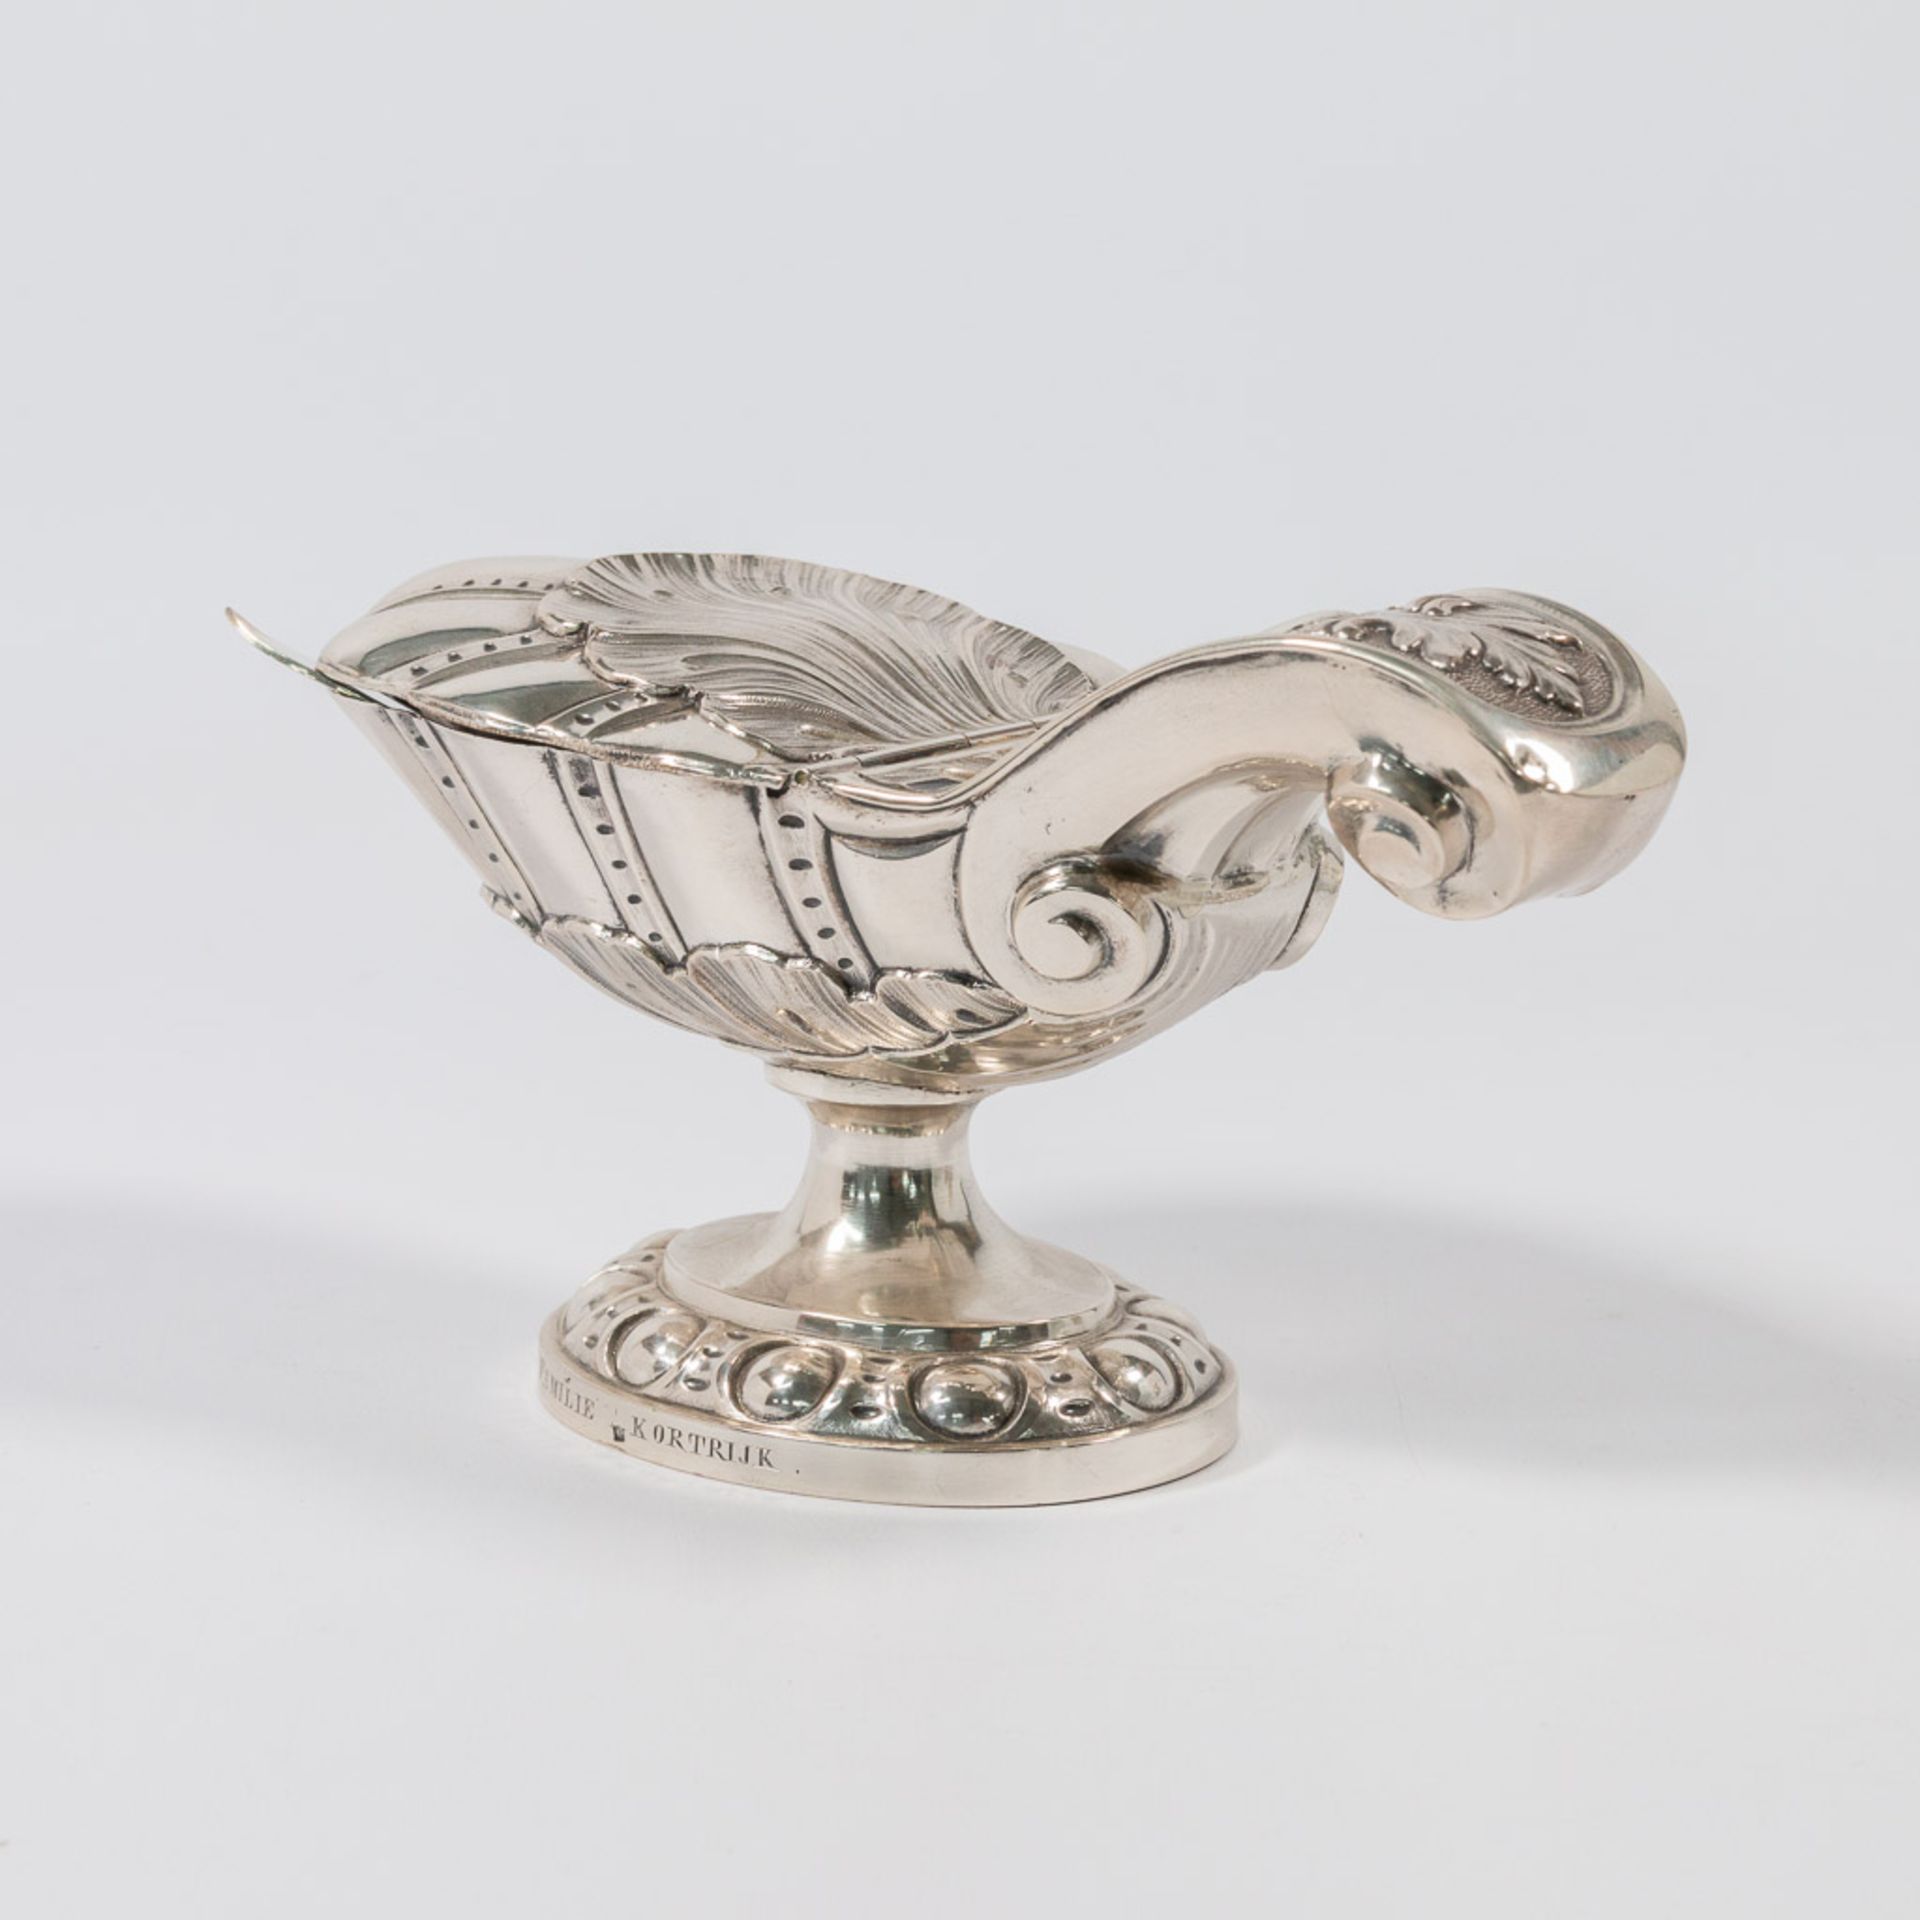 A silver Insence burner and Insence jar. - Image 6 of 39